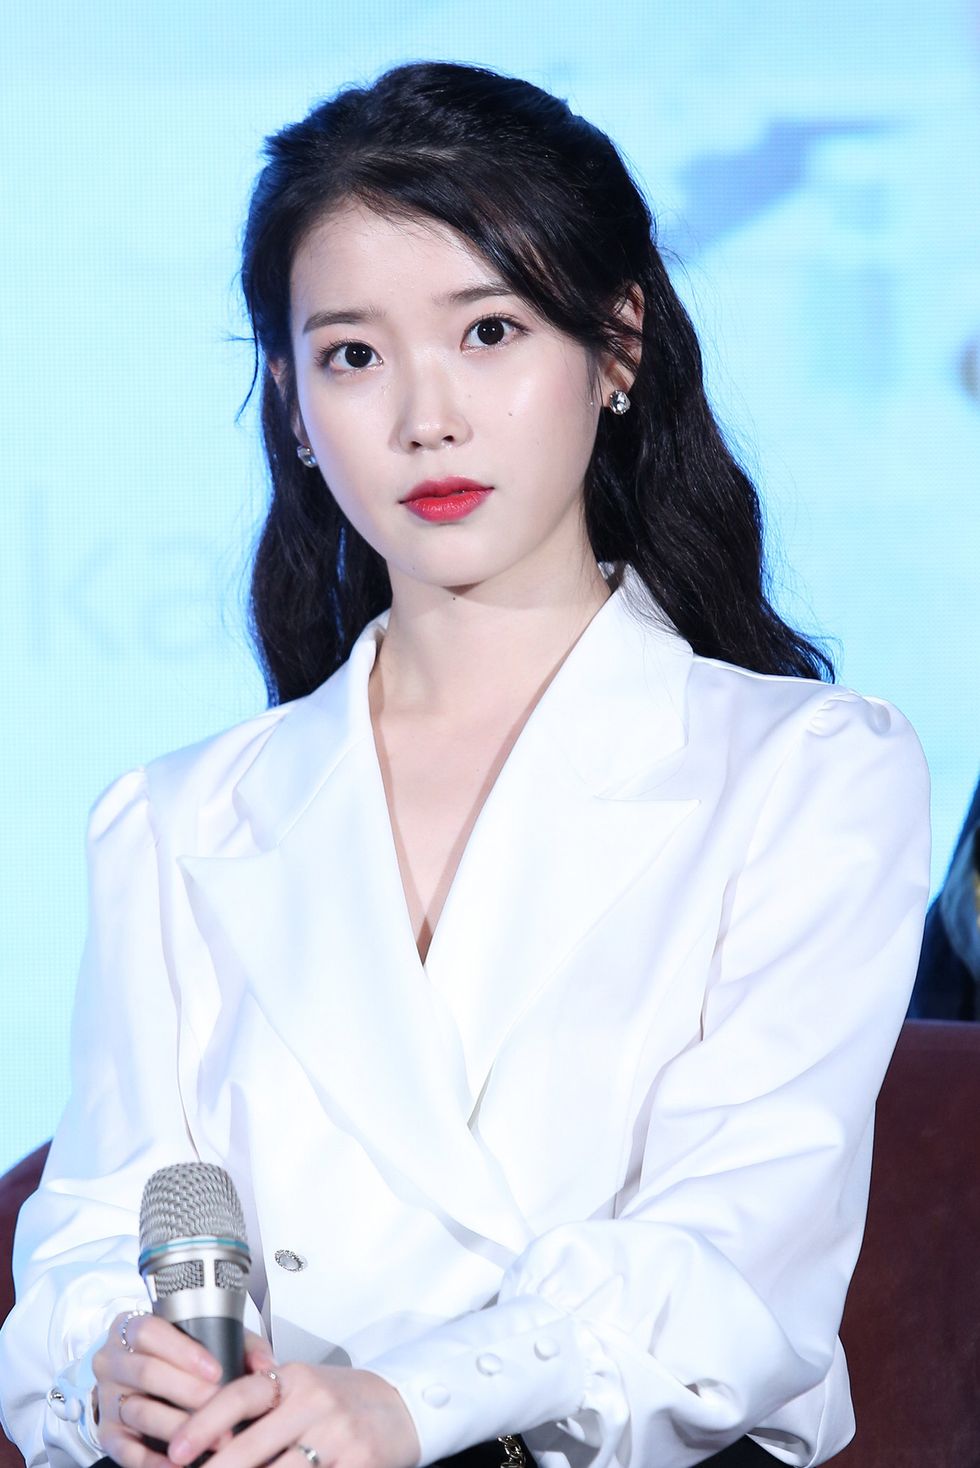 south korean singer iu attends press conference for her concert in taipei